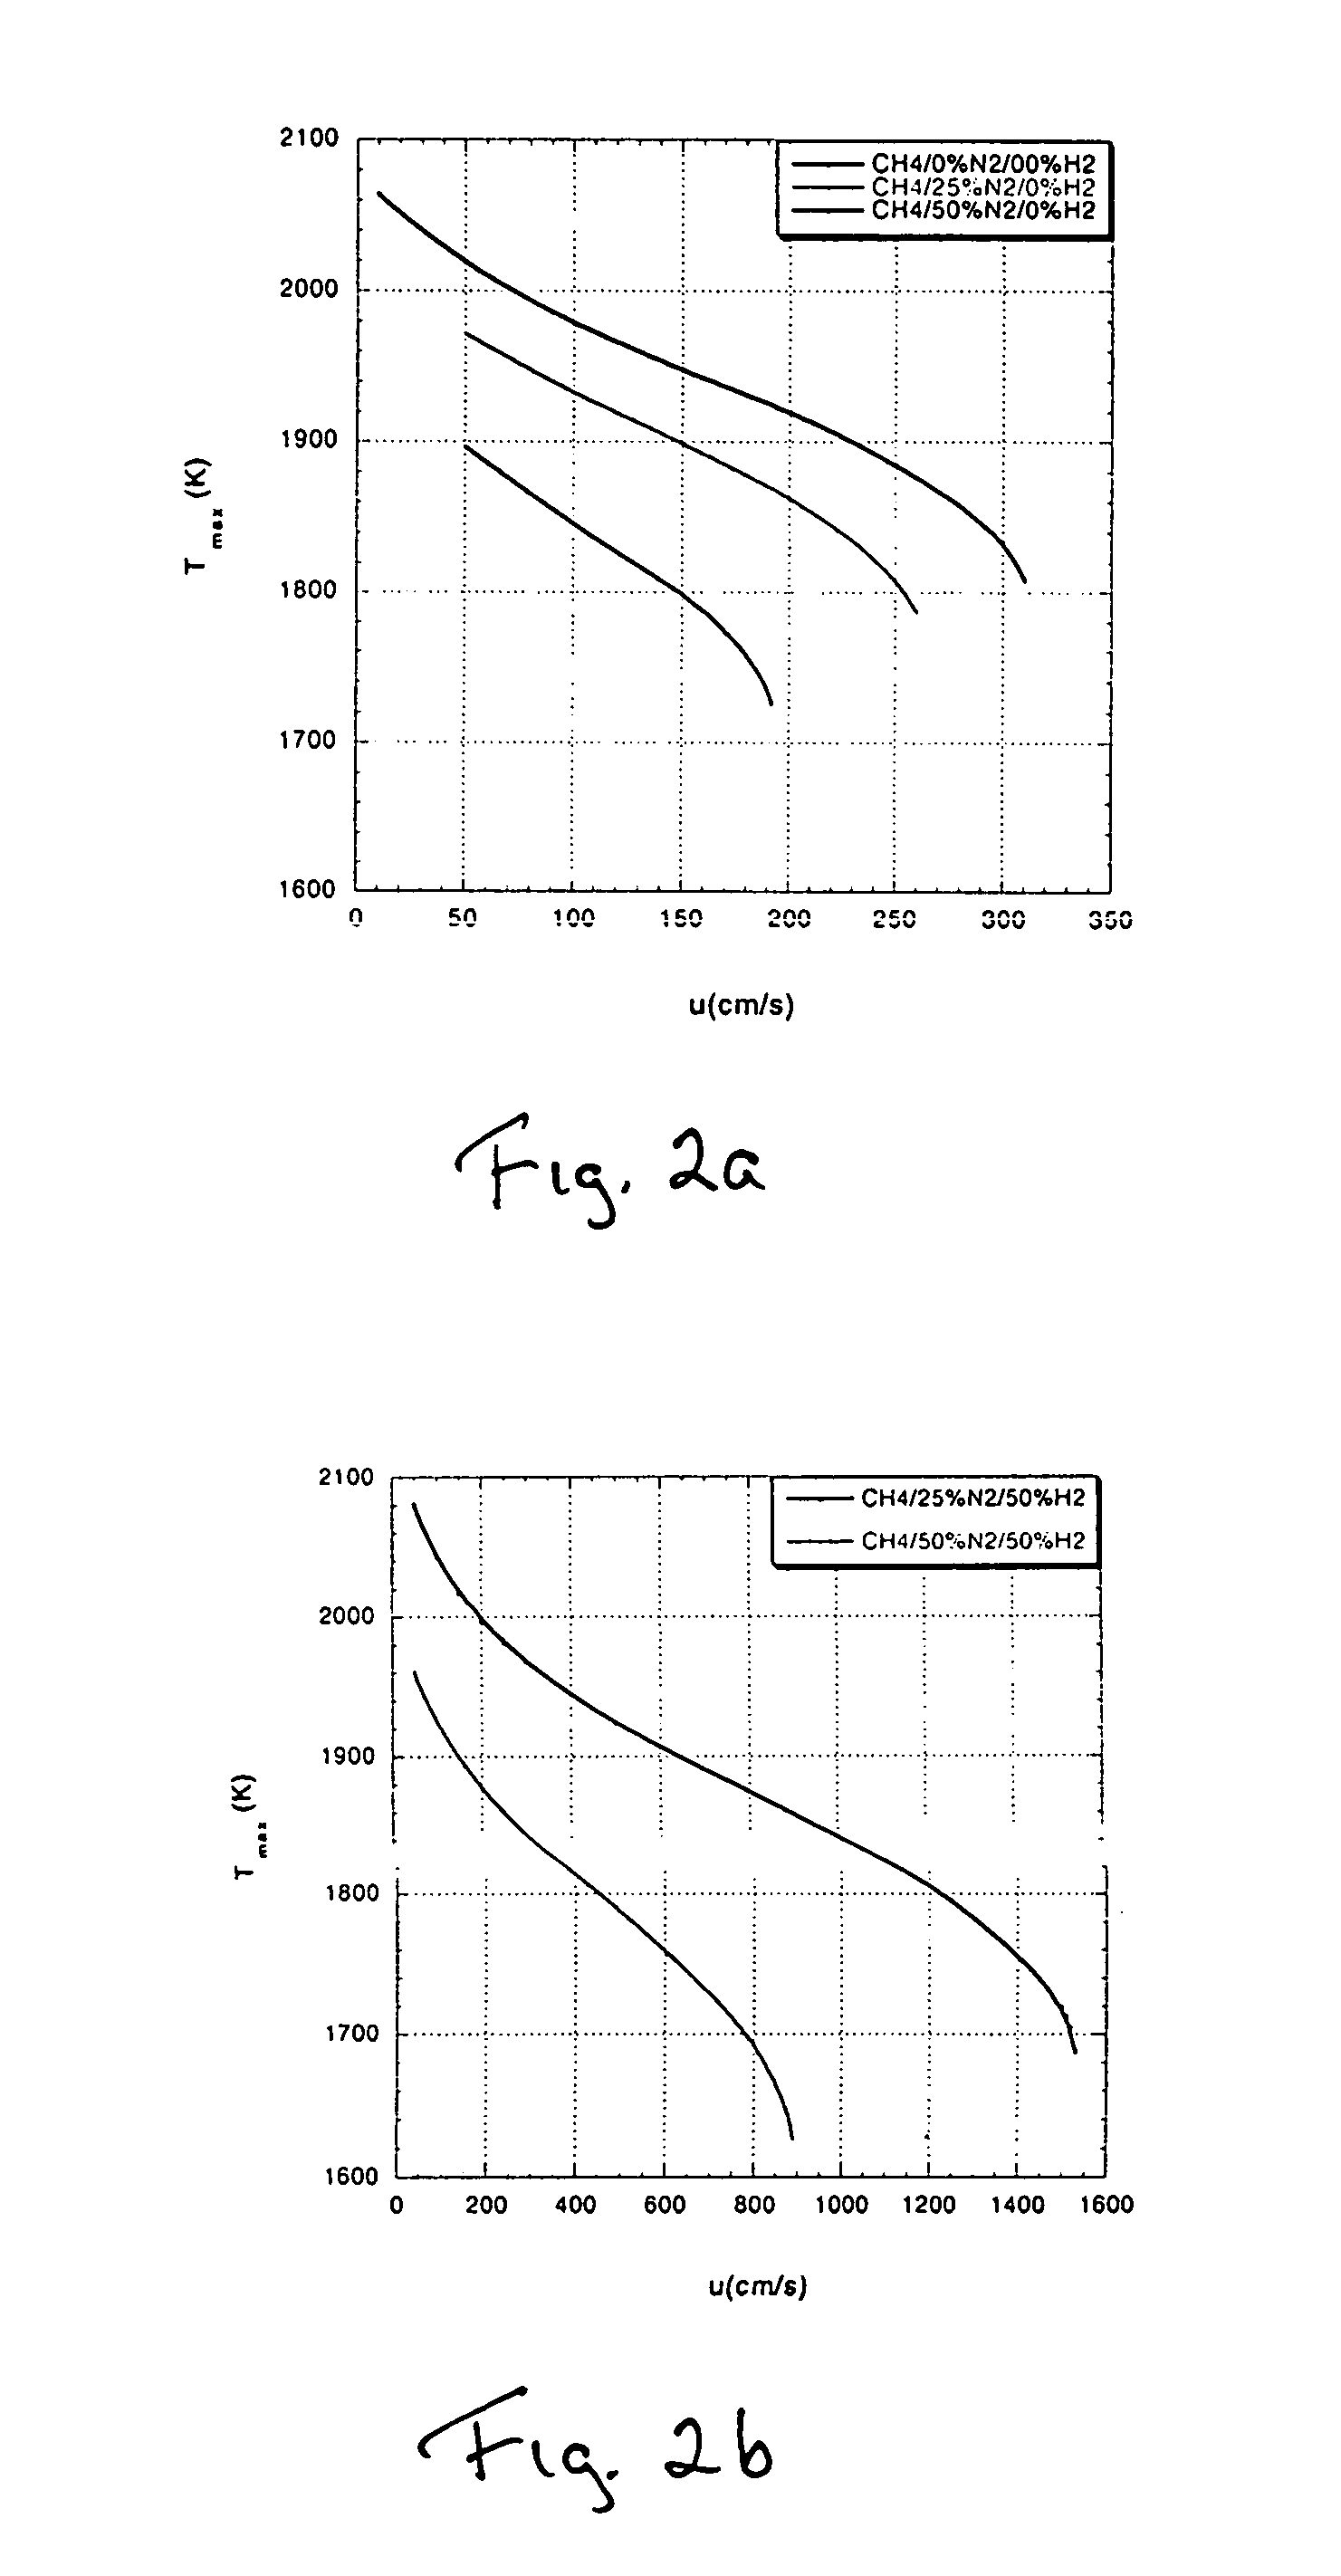 Method for control of NOX emissions from combustors using fuel dilution